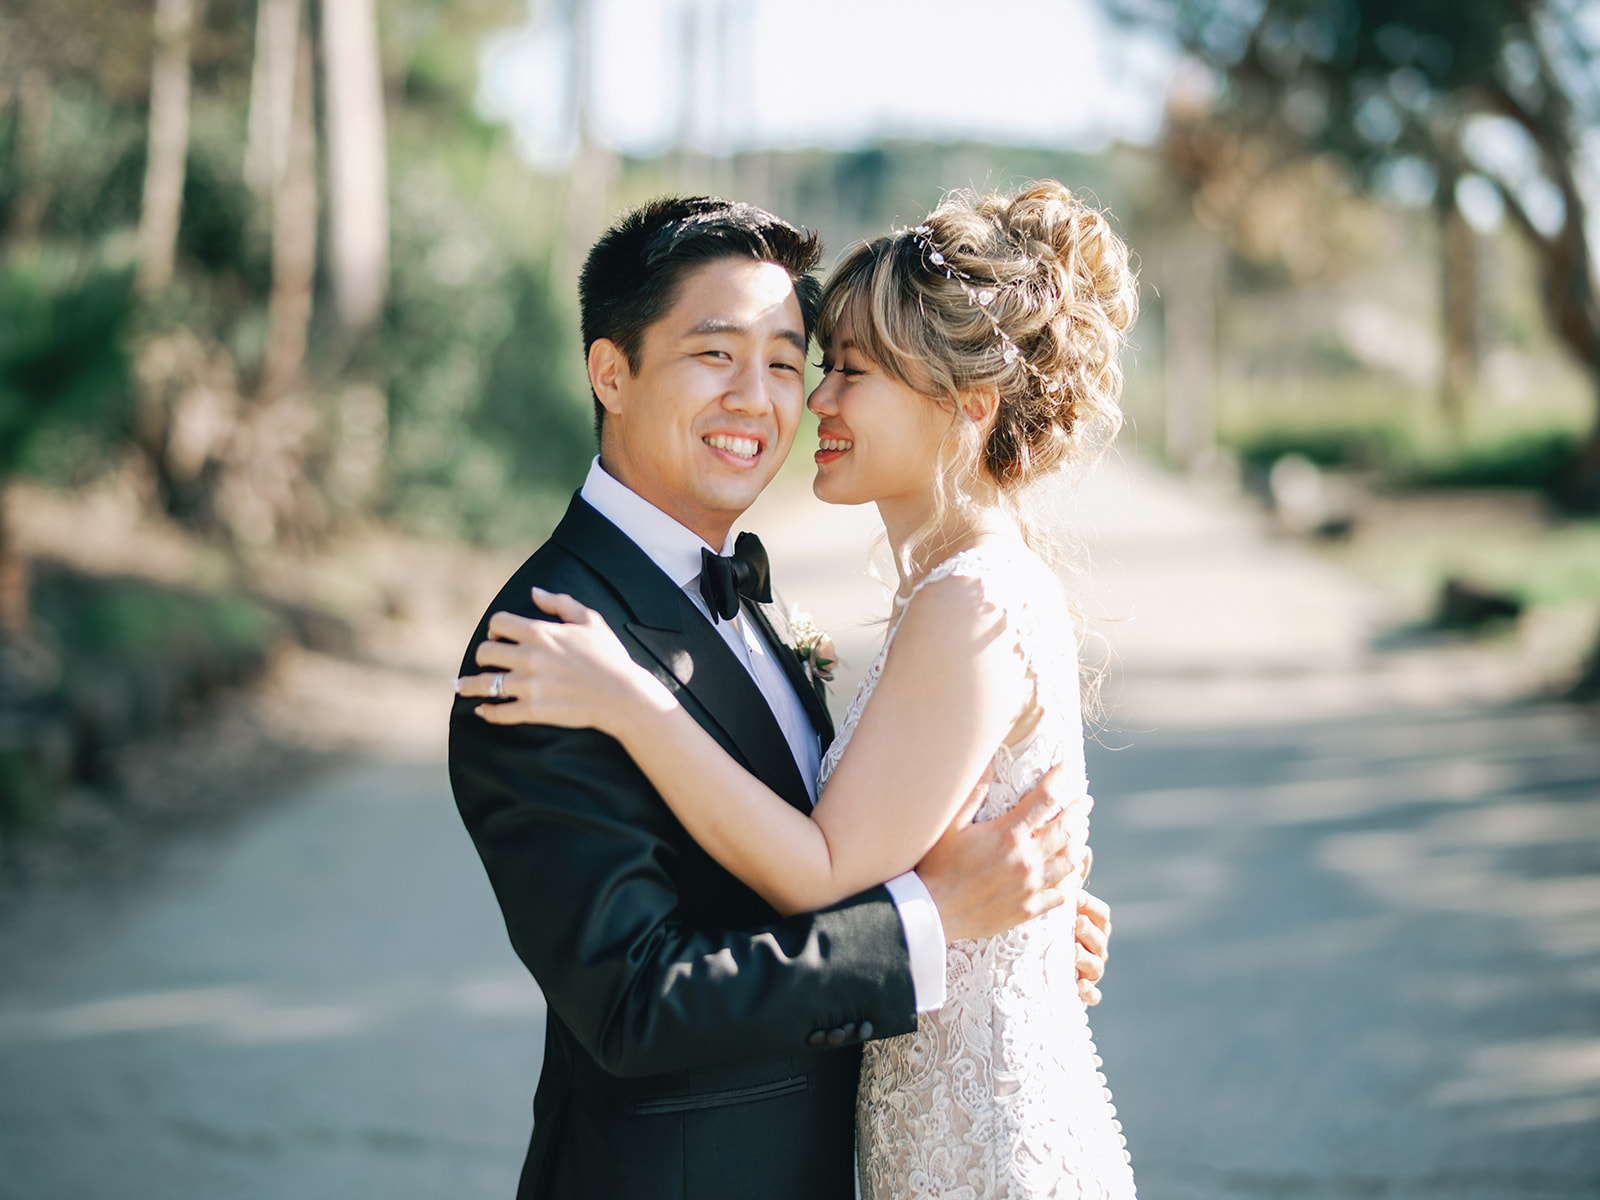 Intimate Wedding and Reception at Inn of the Seventh Ray. Wedding Portrait session at Topanga State Beach.
